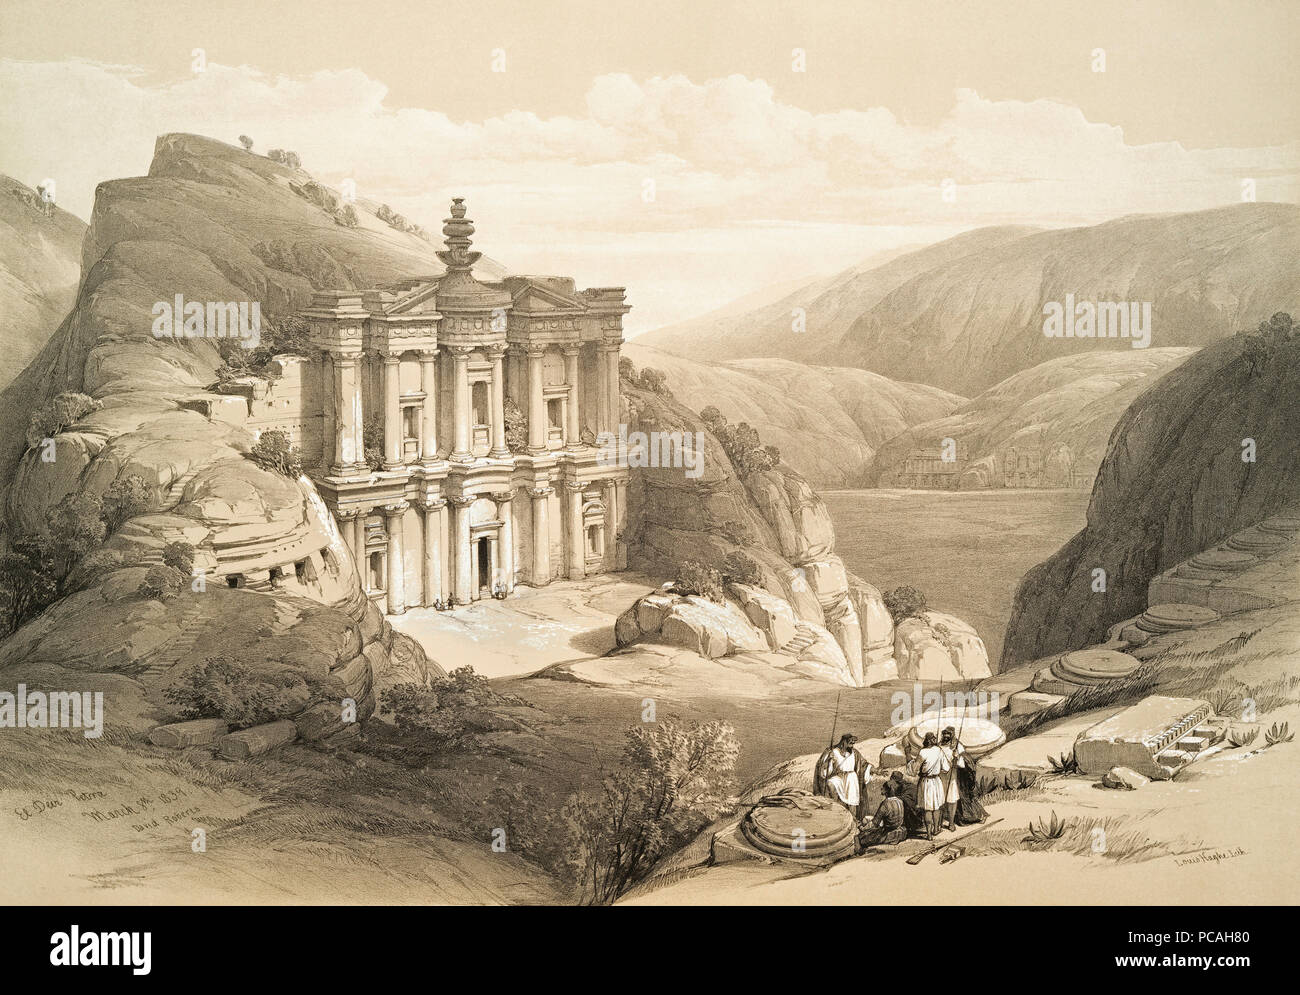 El Deir.  After a work by Scottish artist David Roberts, 1796-1864 and Belgian lithographer Louis Haghe, 1806-1885. Stock Photo